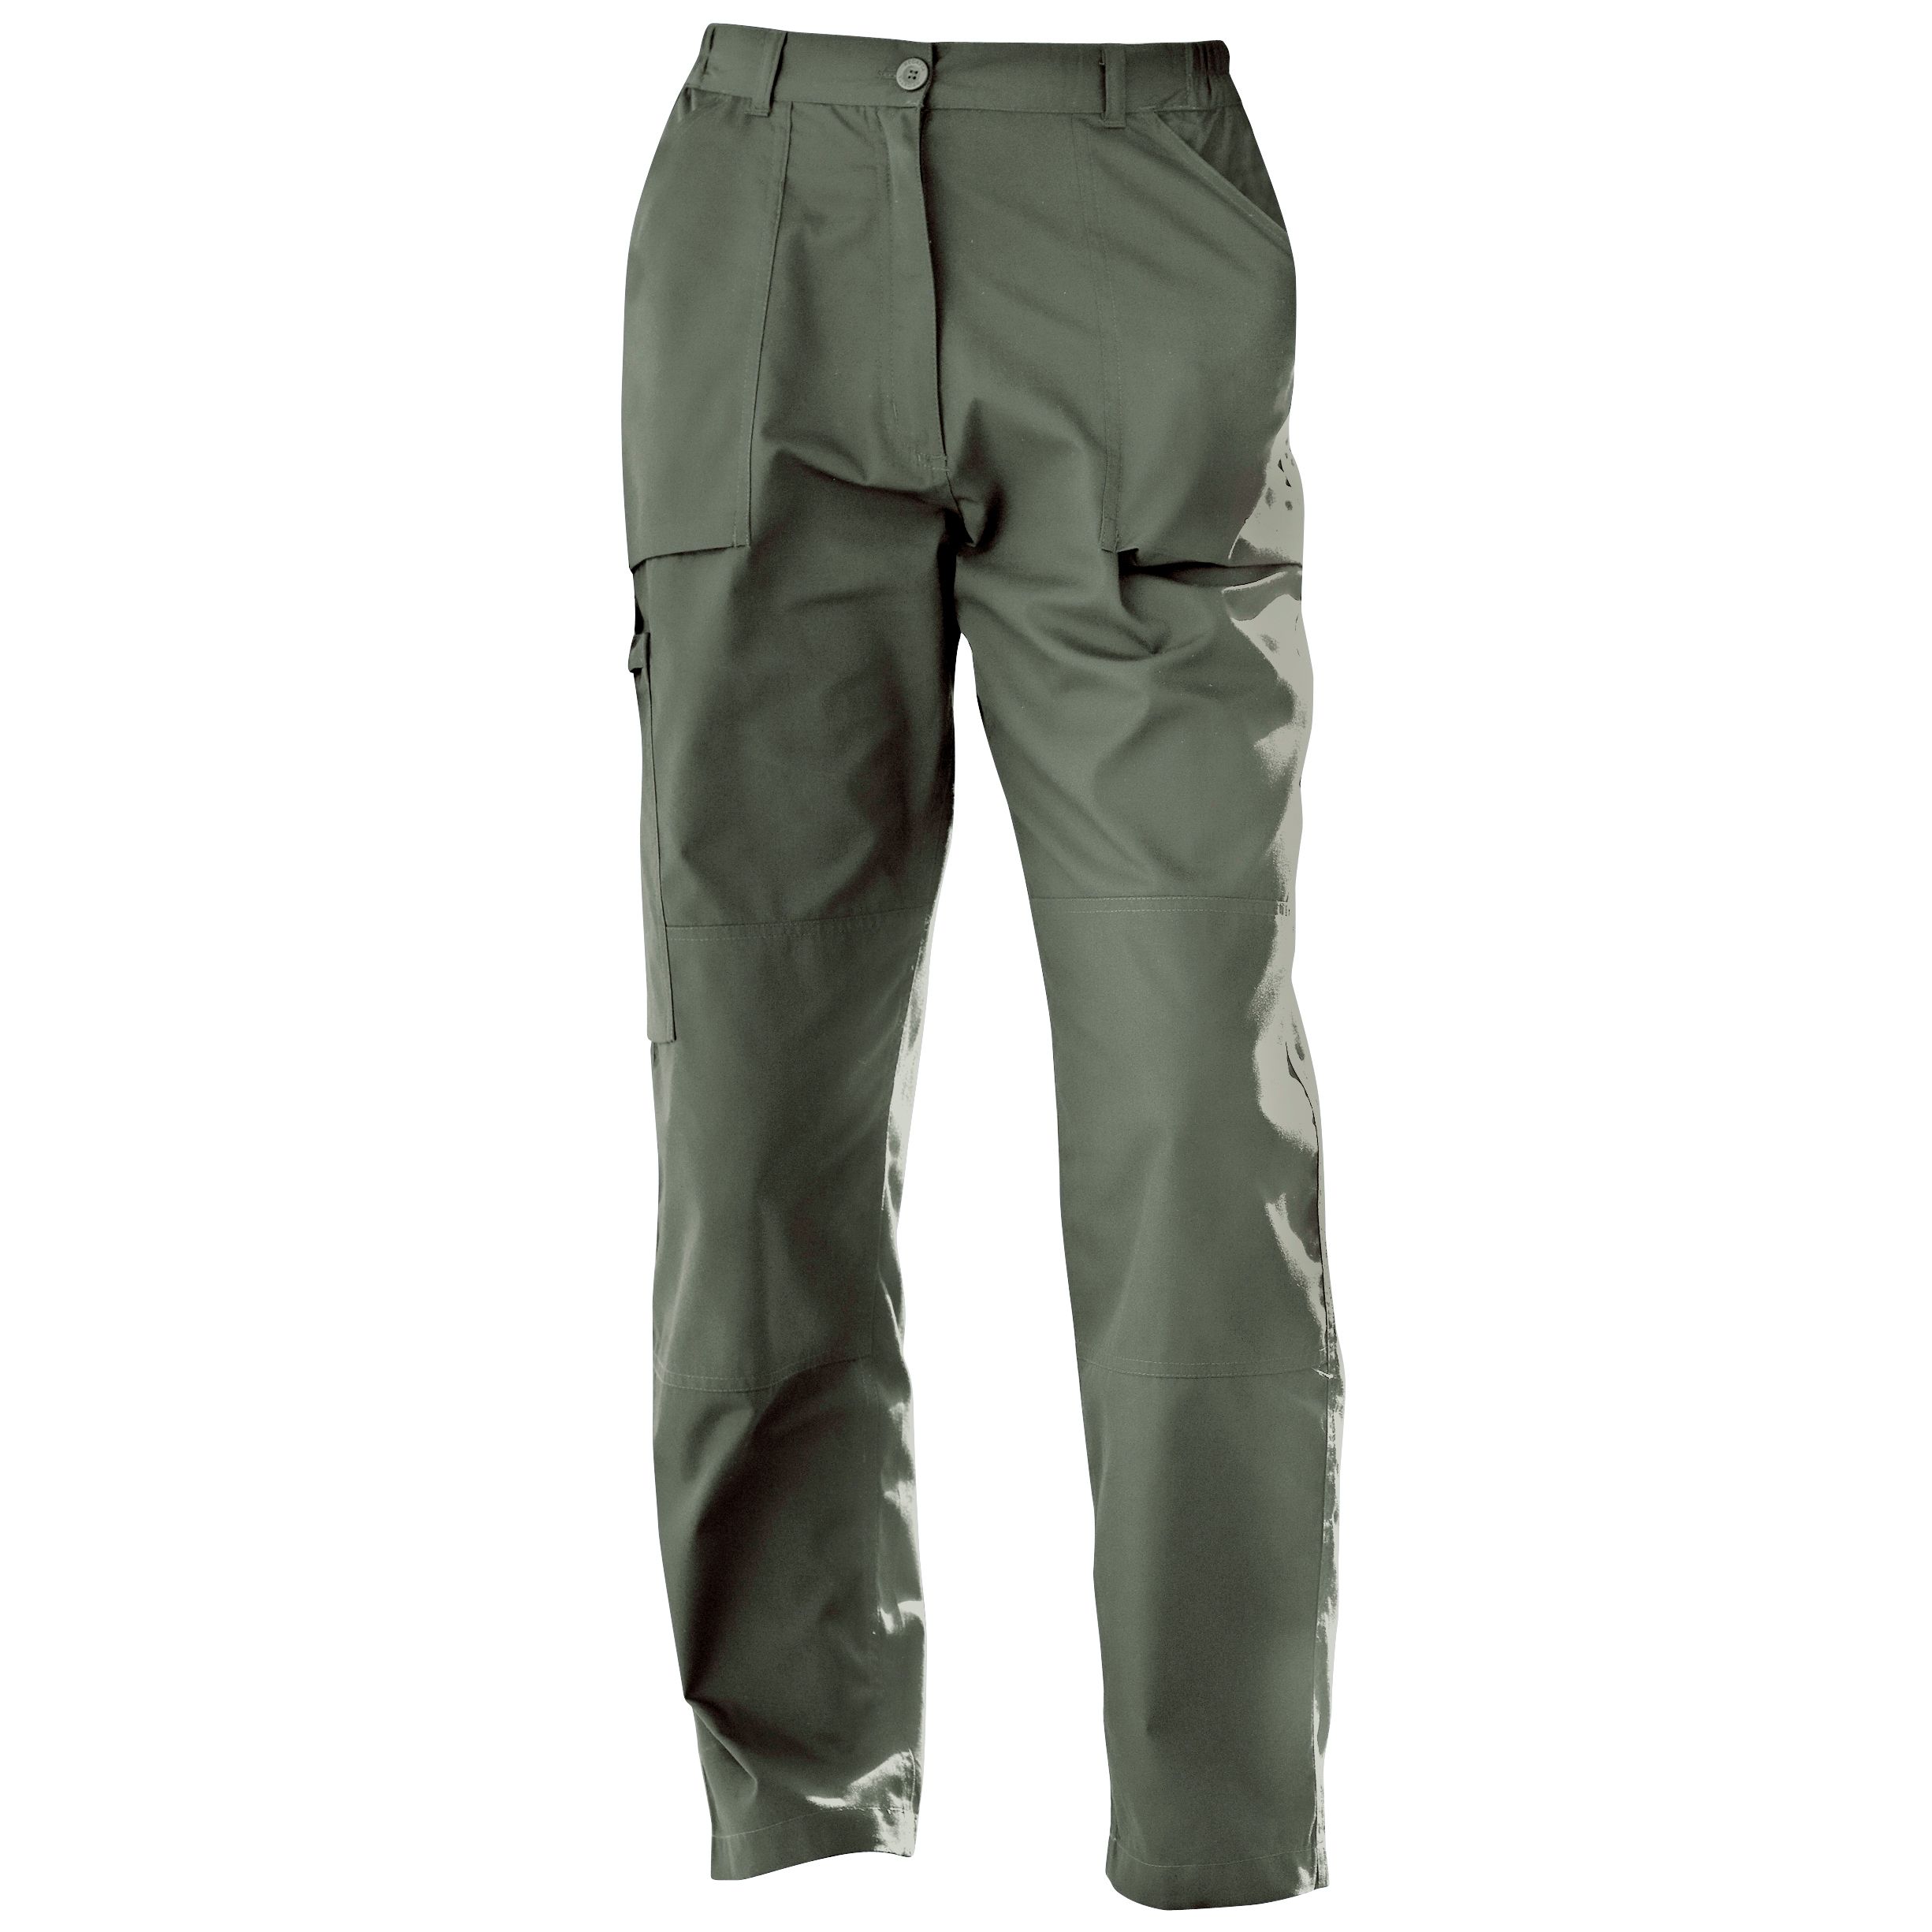 100% polycotton. Part elasticated waist. Belt loops. Multi pocketed with concealed zips. 2 front large pockets with hem bellows. Right side zippered pocket with welt covering. Durable water repellent finish. Leg length: Short - 27, Regular - 29, Long - 31. 180g/m.